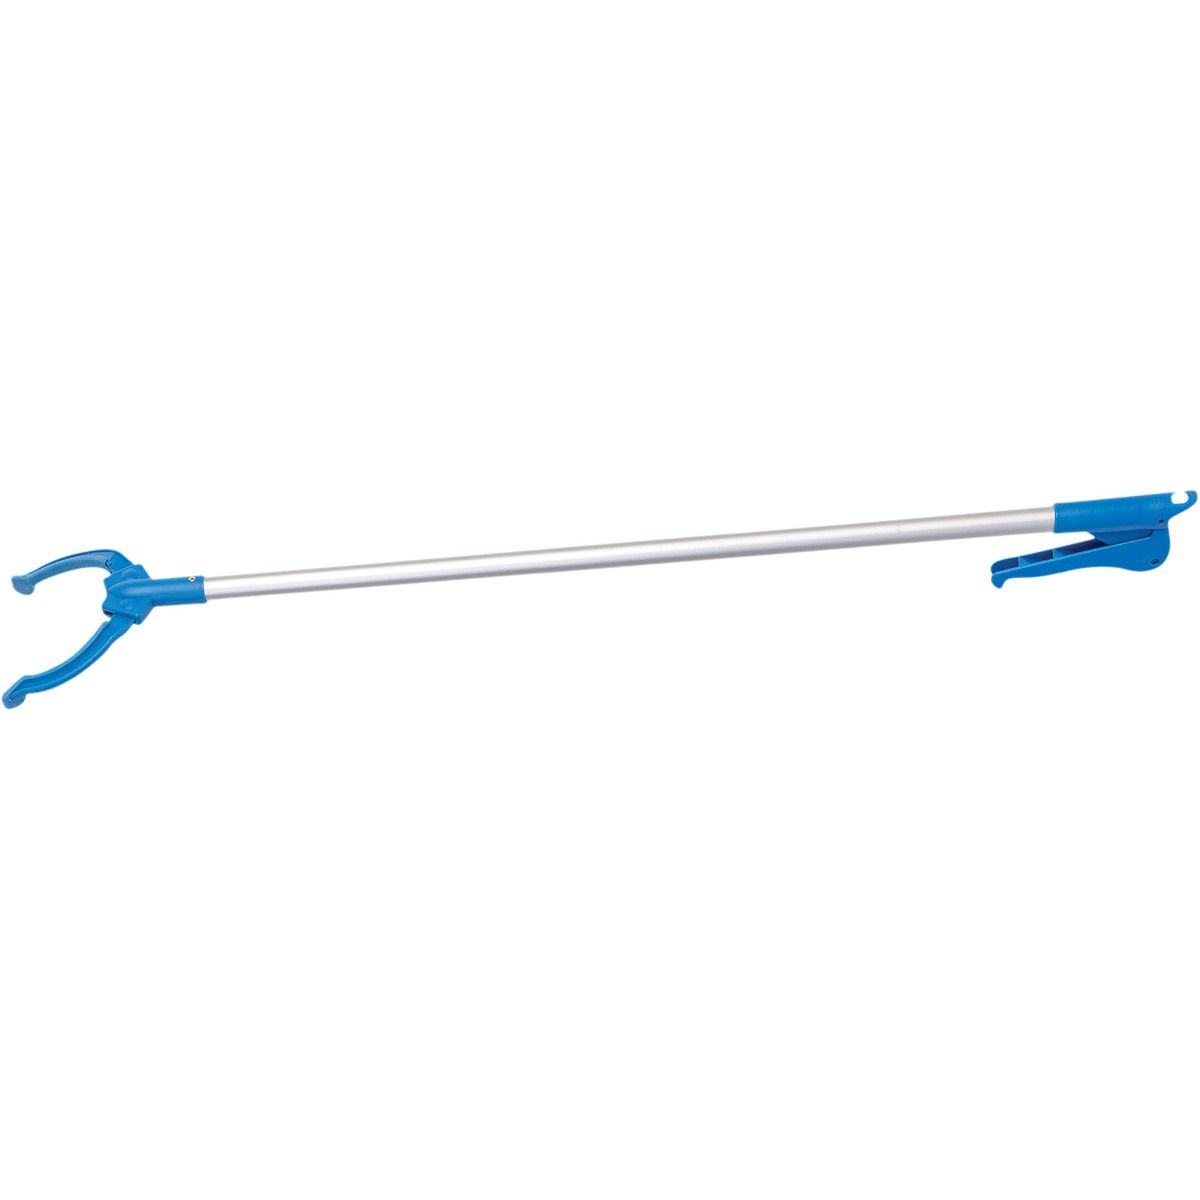 Commercial quality Litter Picker